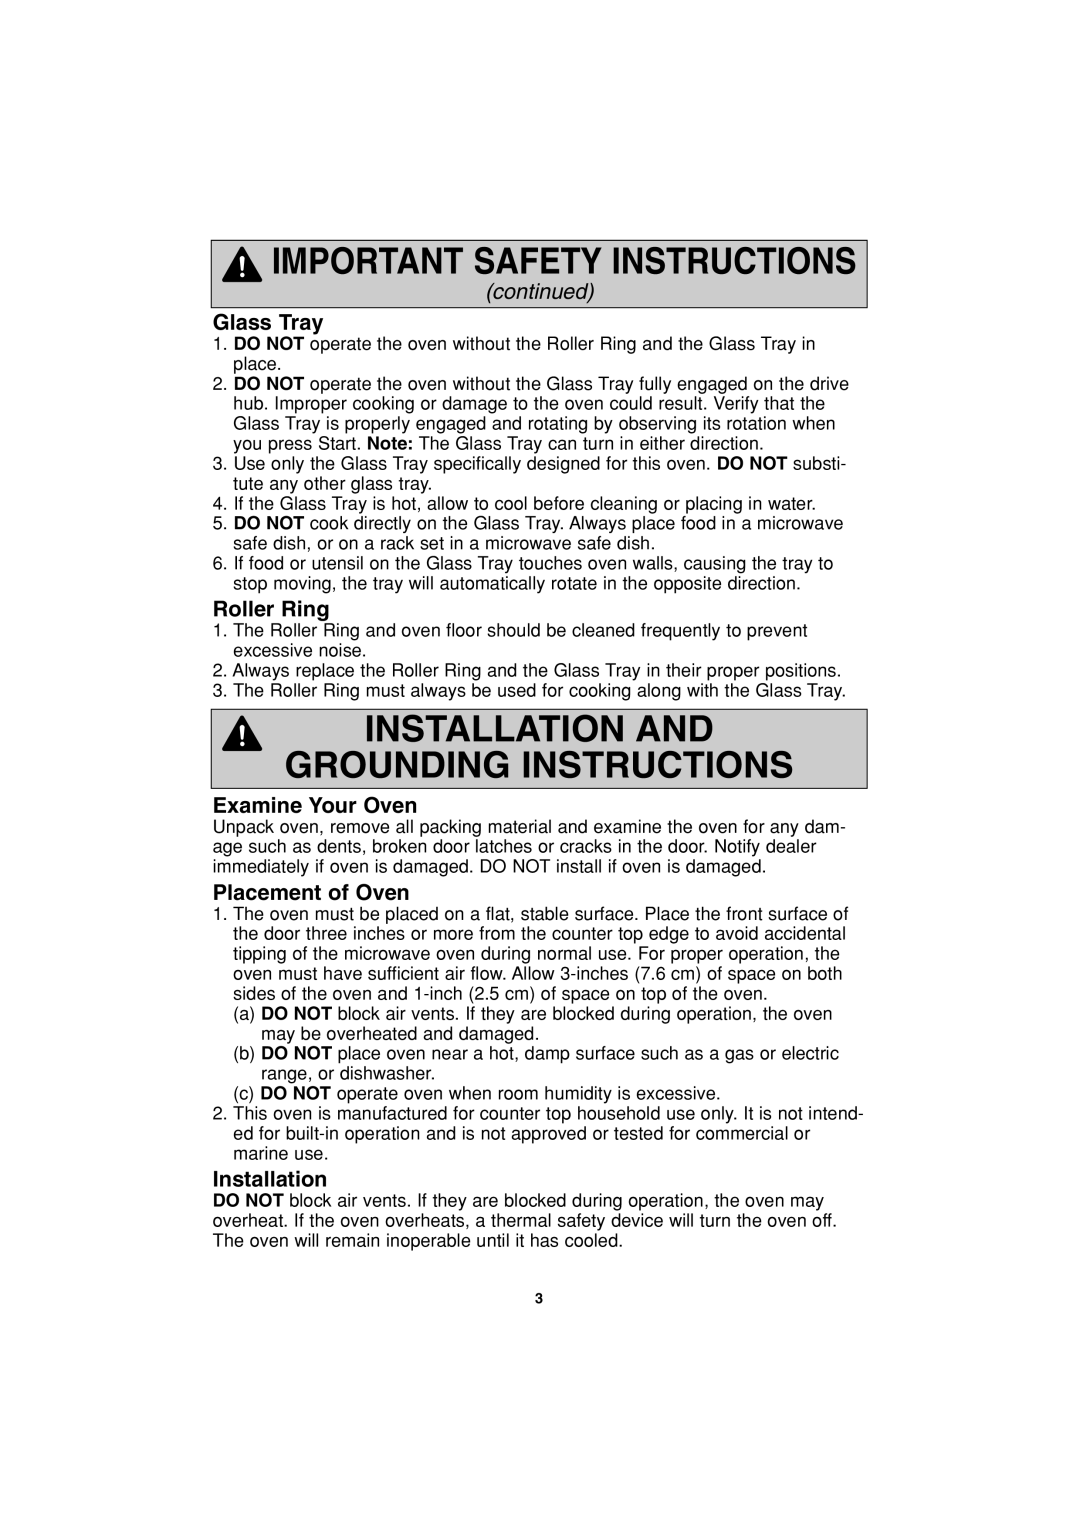 Panasonic NN-S423 Installation And Grounding Instructions, Glass Tray, Roller Ring, Examine Your Oven, Placement of Oven 